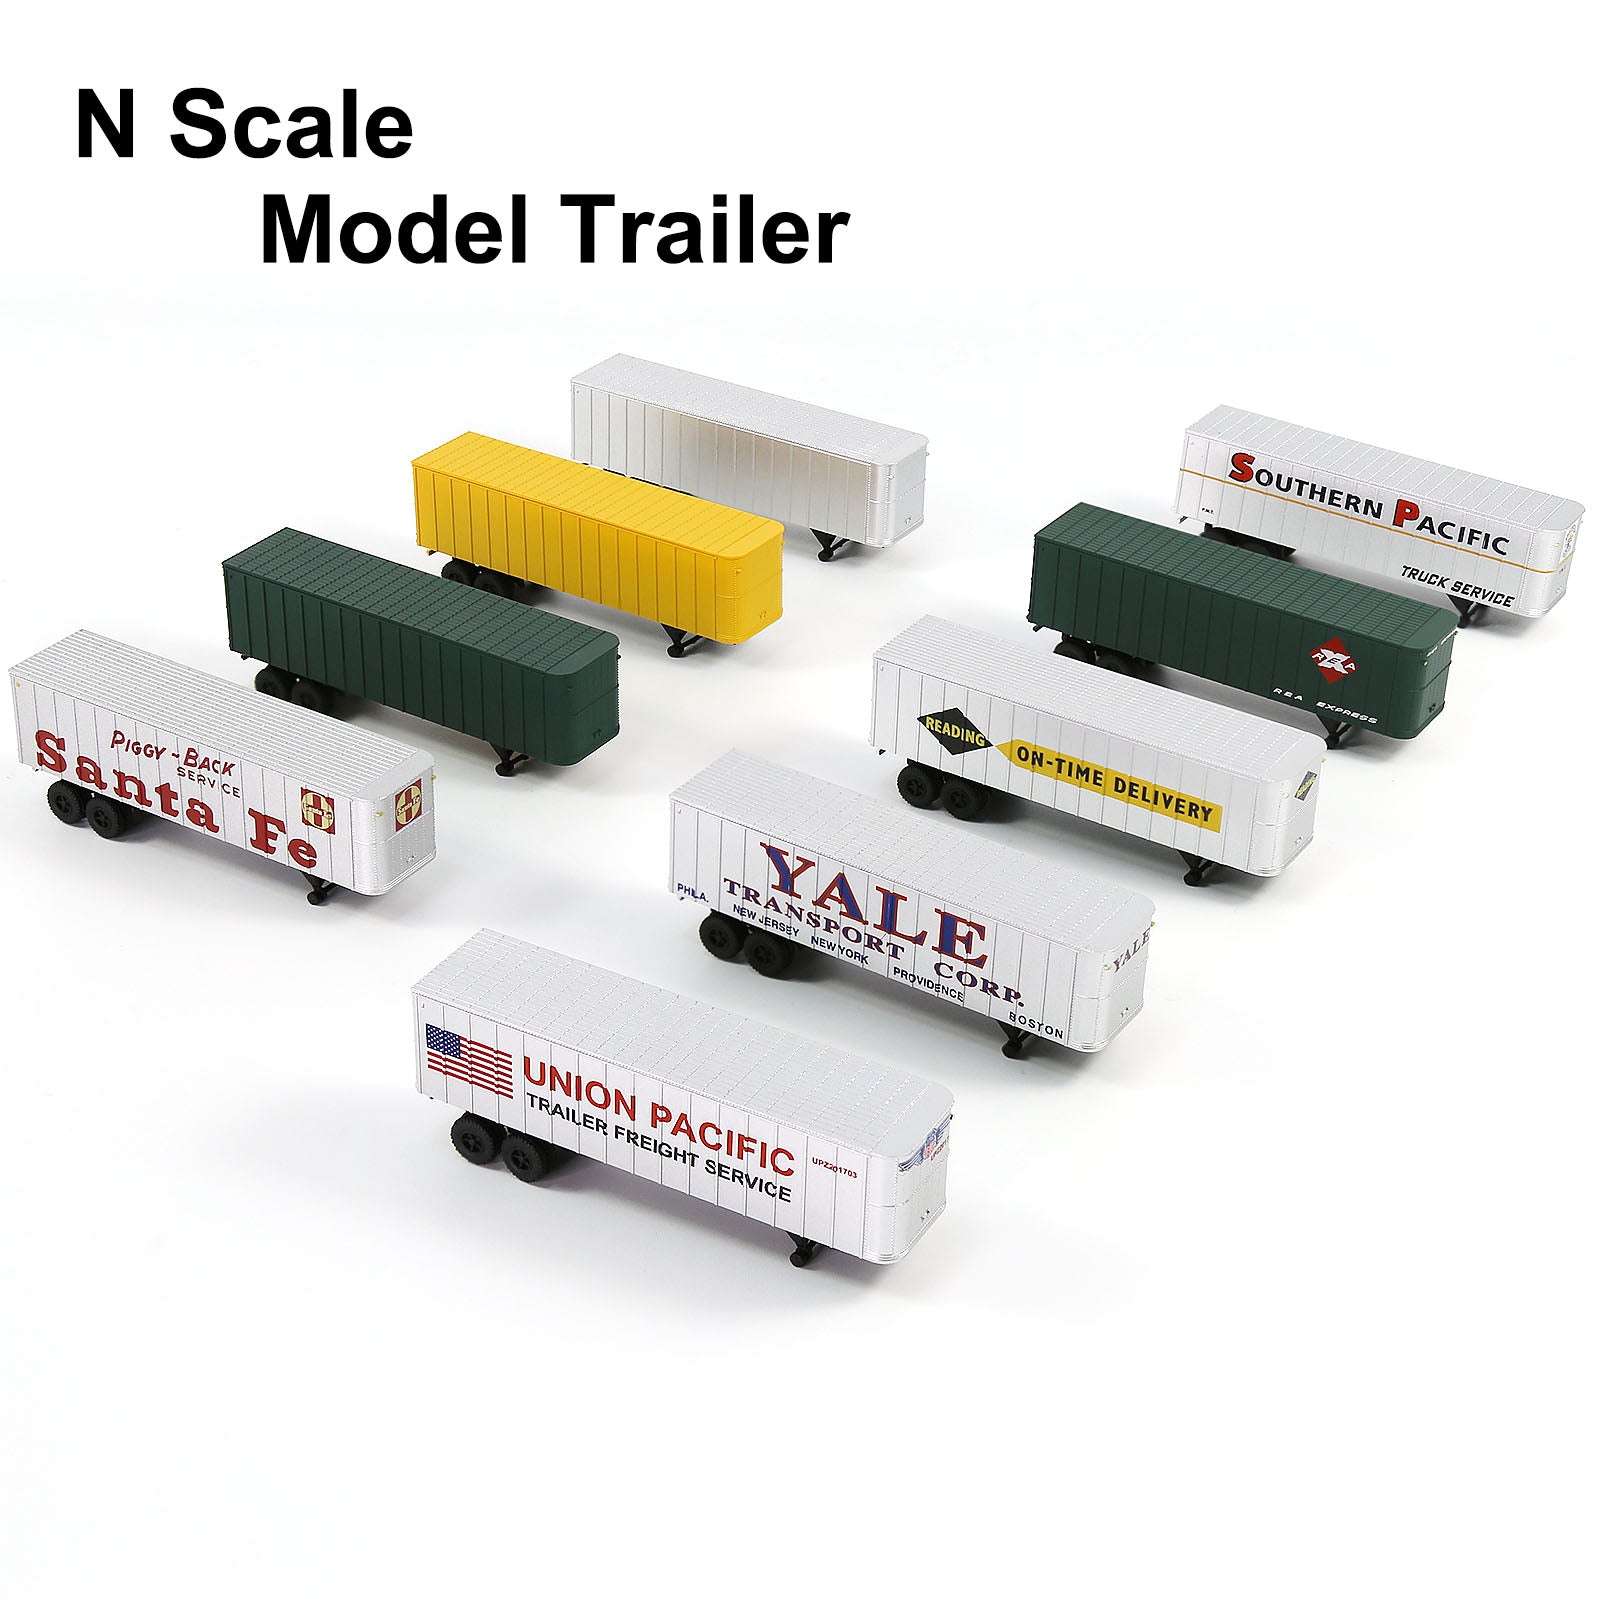 C15066 2 Pieces N Scale 1:160 Model Trailer for Railway Tractor